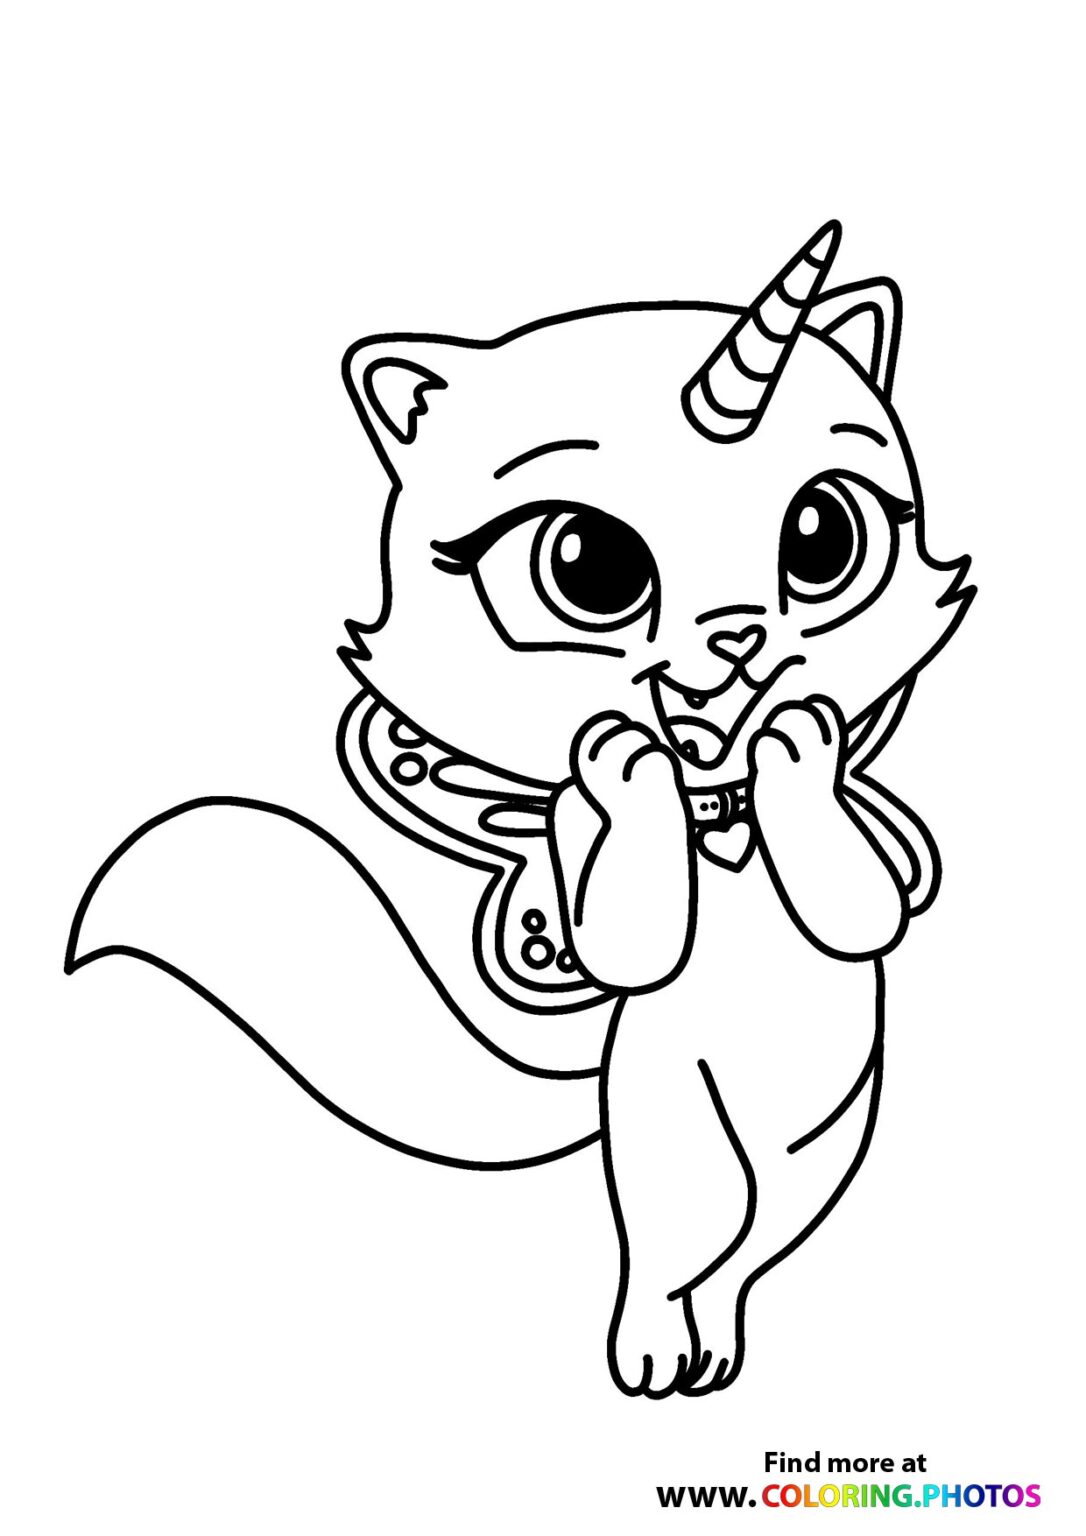 unicorn-cat-pages-coloring-pages